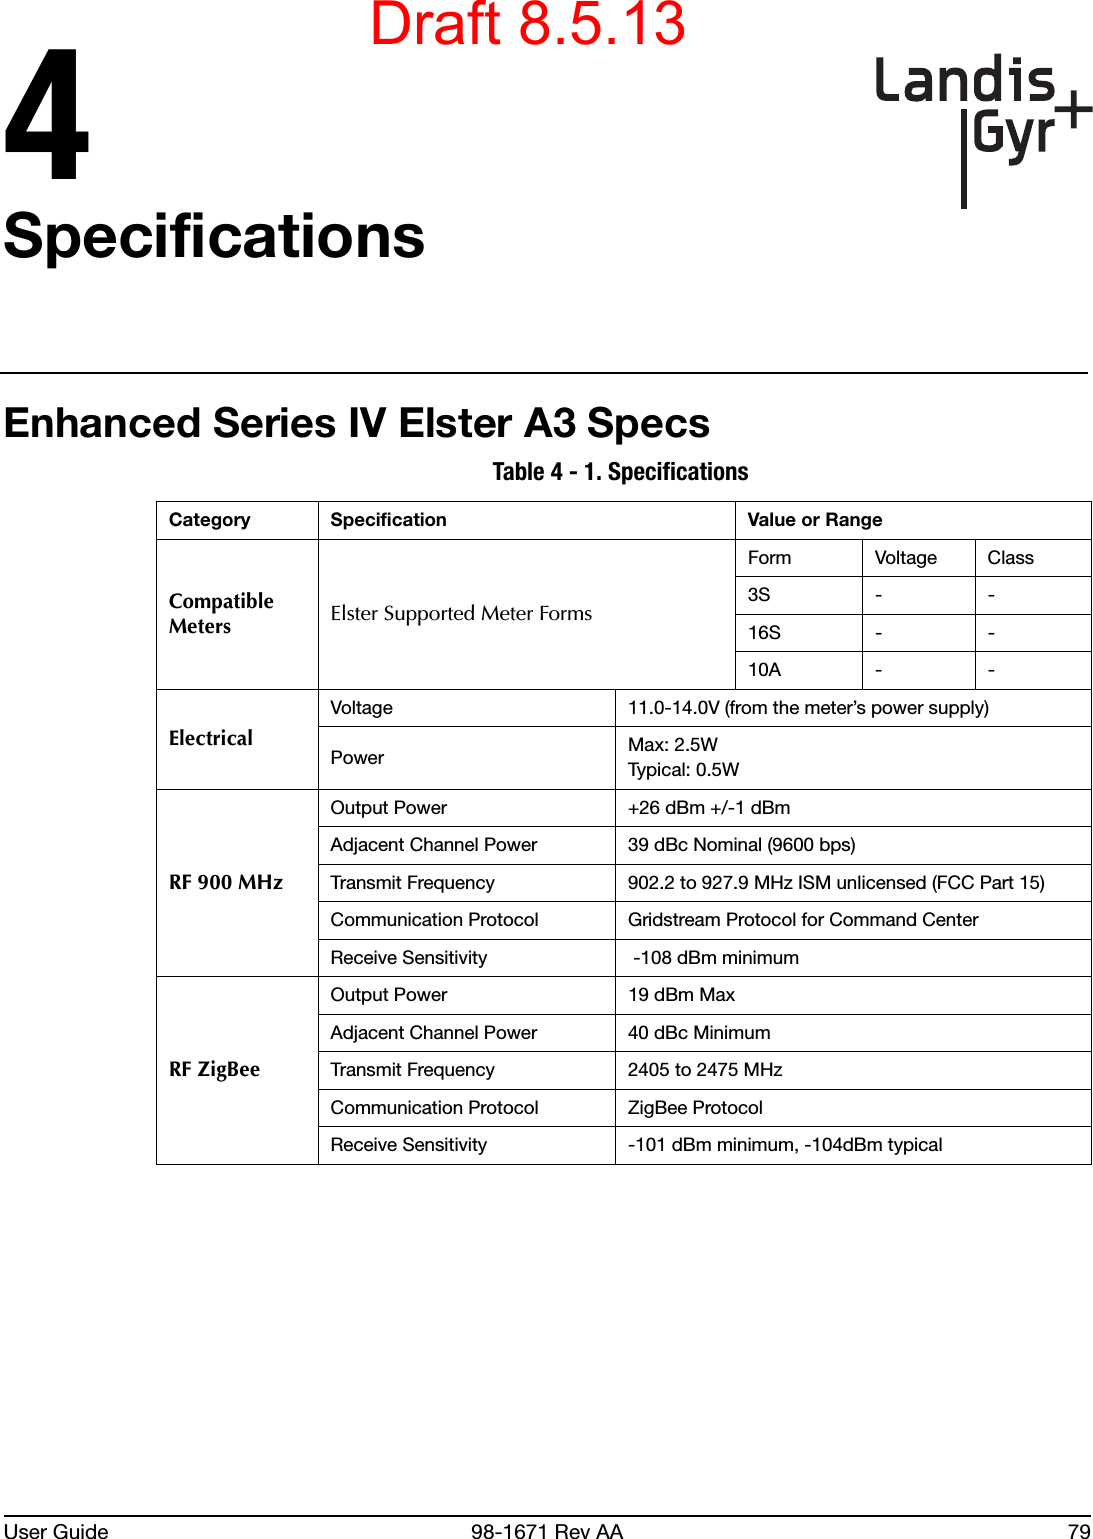 User Guide 98-1671 Rev AA 794SpecificationsEnhanced Series IV Elster A3 Specs Table 4 - 1. Specifications Category Specification Value or RangeCompatible Meters Elster Supported Meter FormsForm Voltage Class3S - -16S - -10A - -ElectricalVoltage 11.0-14.0V (from the meter’s power supply)Power Max: 2.5WTypical: 0.5WRF 900 MHzOutput Power +26 dBm +/-1 dBmAdjacent Channel Power 39 dBc Nominal (9600 bps)Transmit Frequency 902.2 to 927.9 MHz ISM unlicensed (FCC Part 15)Communication Protocol Gridstream Protocol for Command CenterReceive Sensitivity  -108 dBm minimumRF ZigBeeOutput Power 19 dBm MaxAdjacent Channel Power 40 dBc MinimumTransmit Frequency 2405 to 2475 MHzCommunication Protocol ZigBee ProtocolReceive Sensitivity -101 dBm minimum, -104dBm typicalDraft 8.5.13